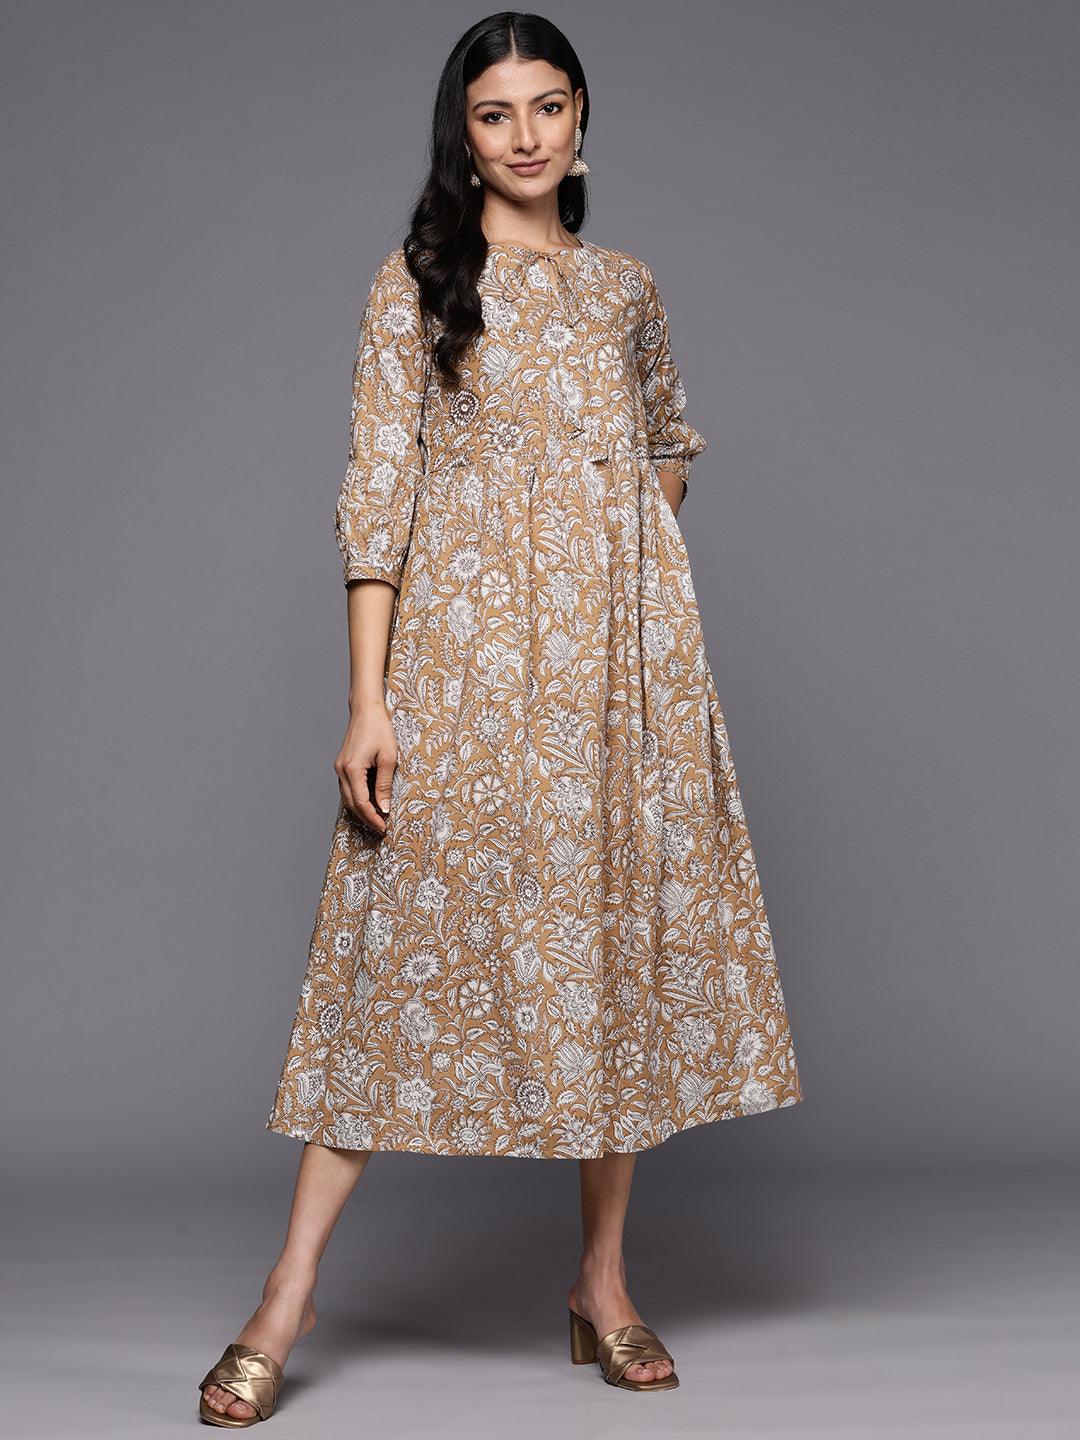 Camel Brown Printed Cotton Empire Dress